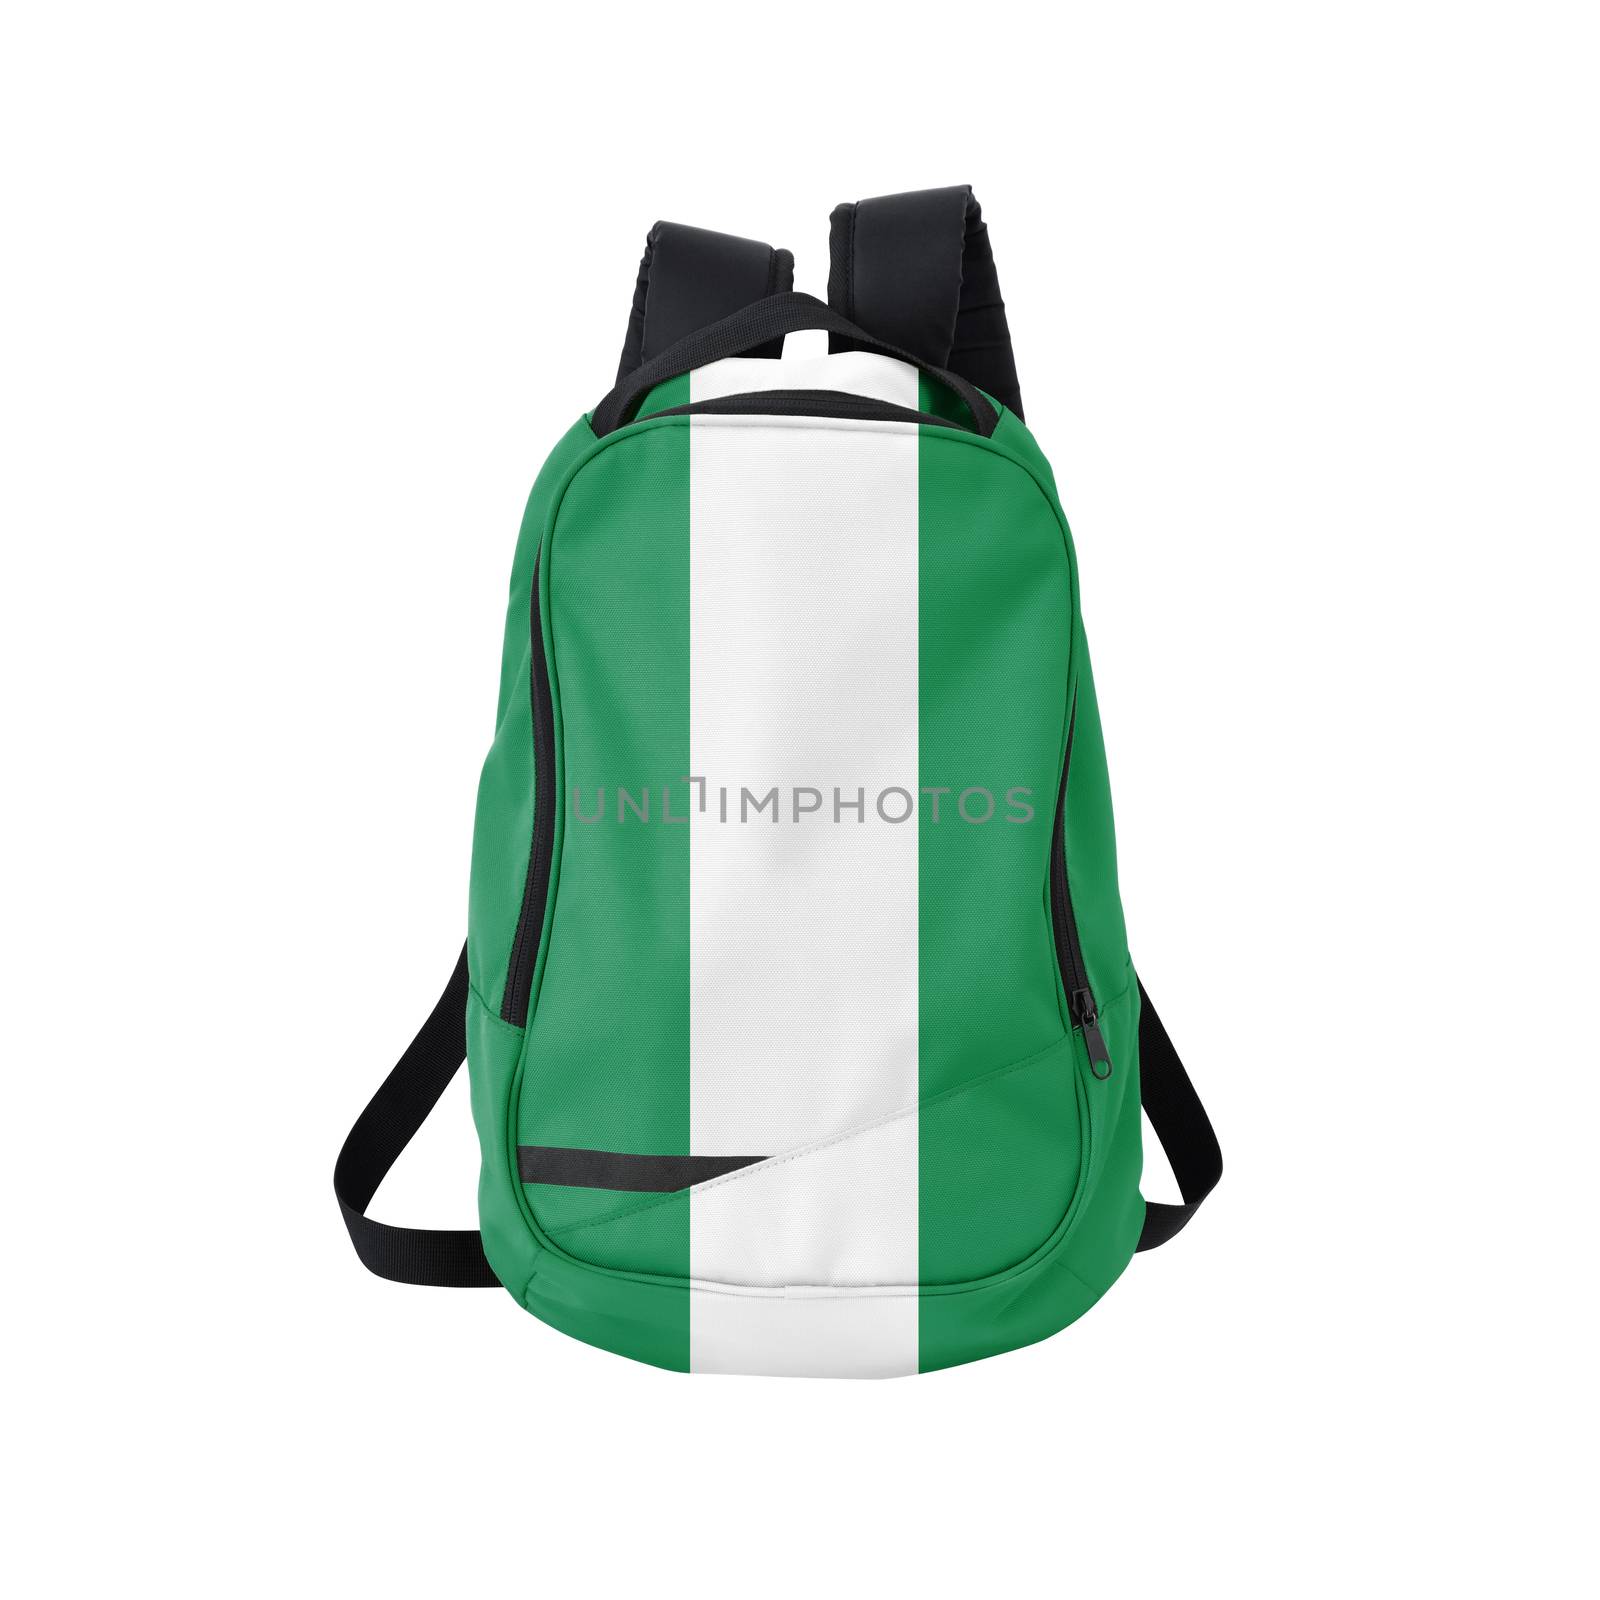 Nigeria flag backpack isolated on white by kravcs